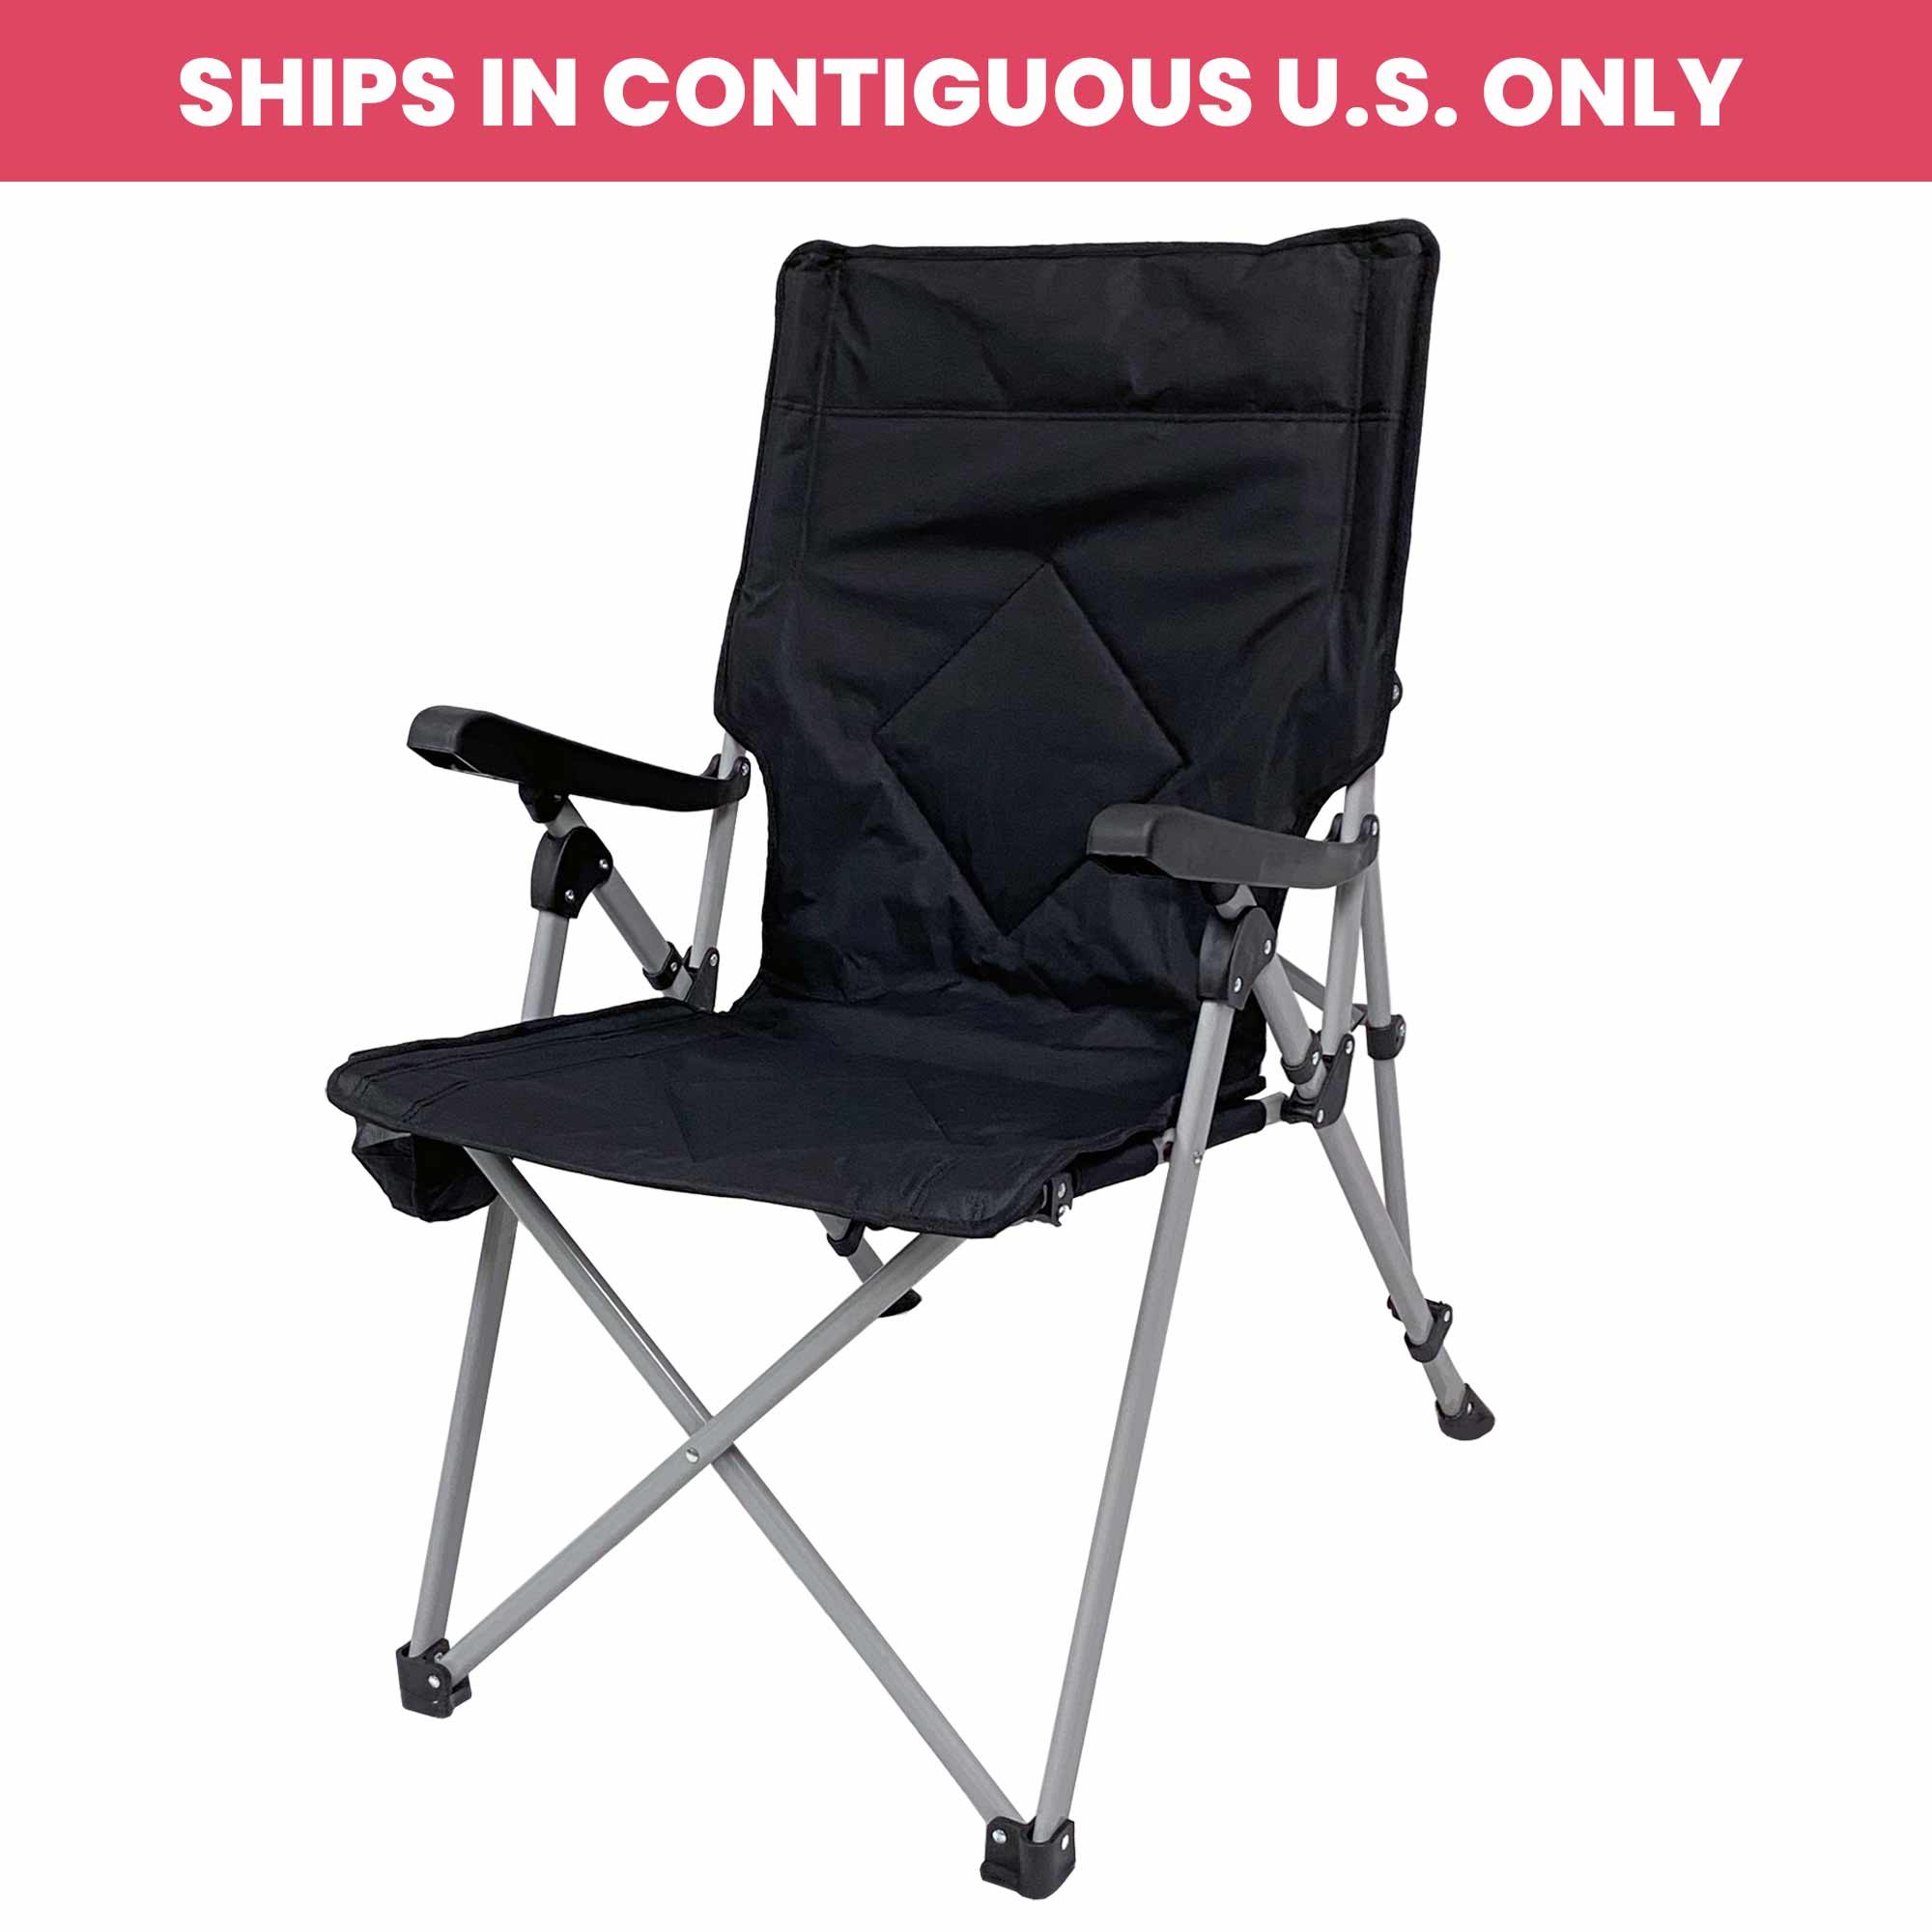 Portable Multi-Position Sport and Camp Chair